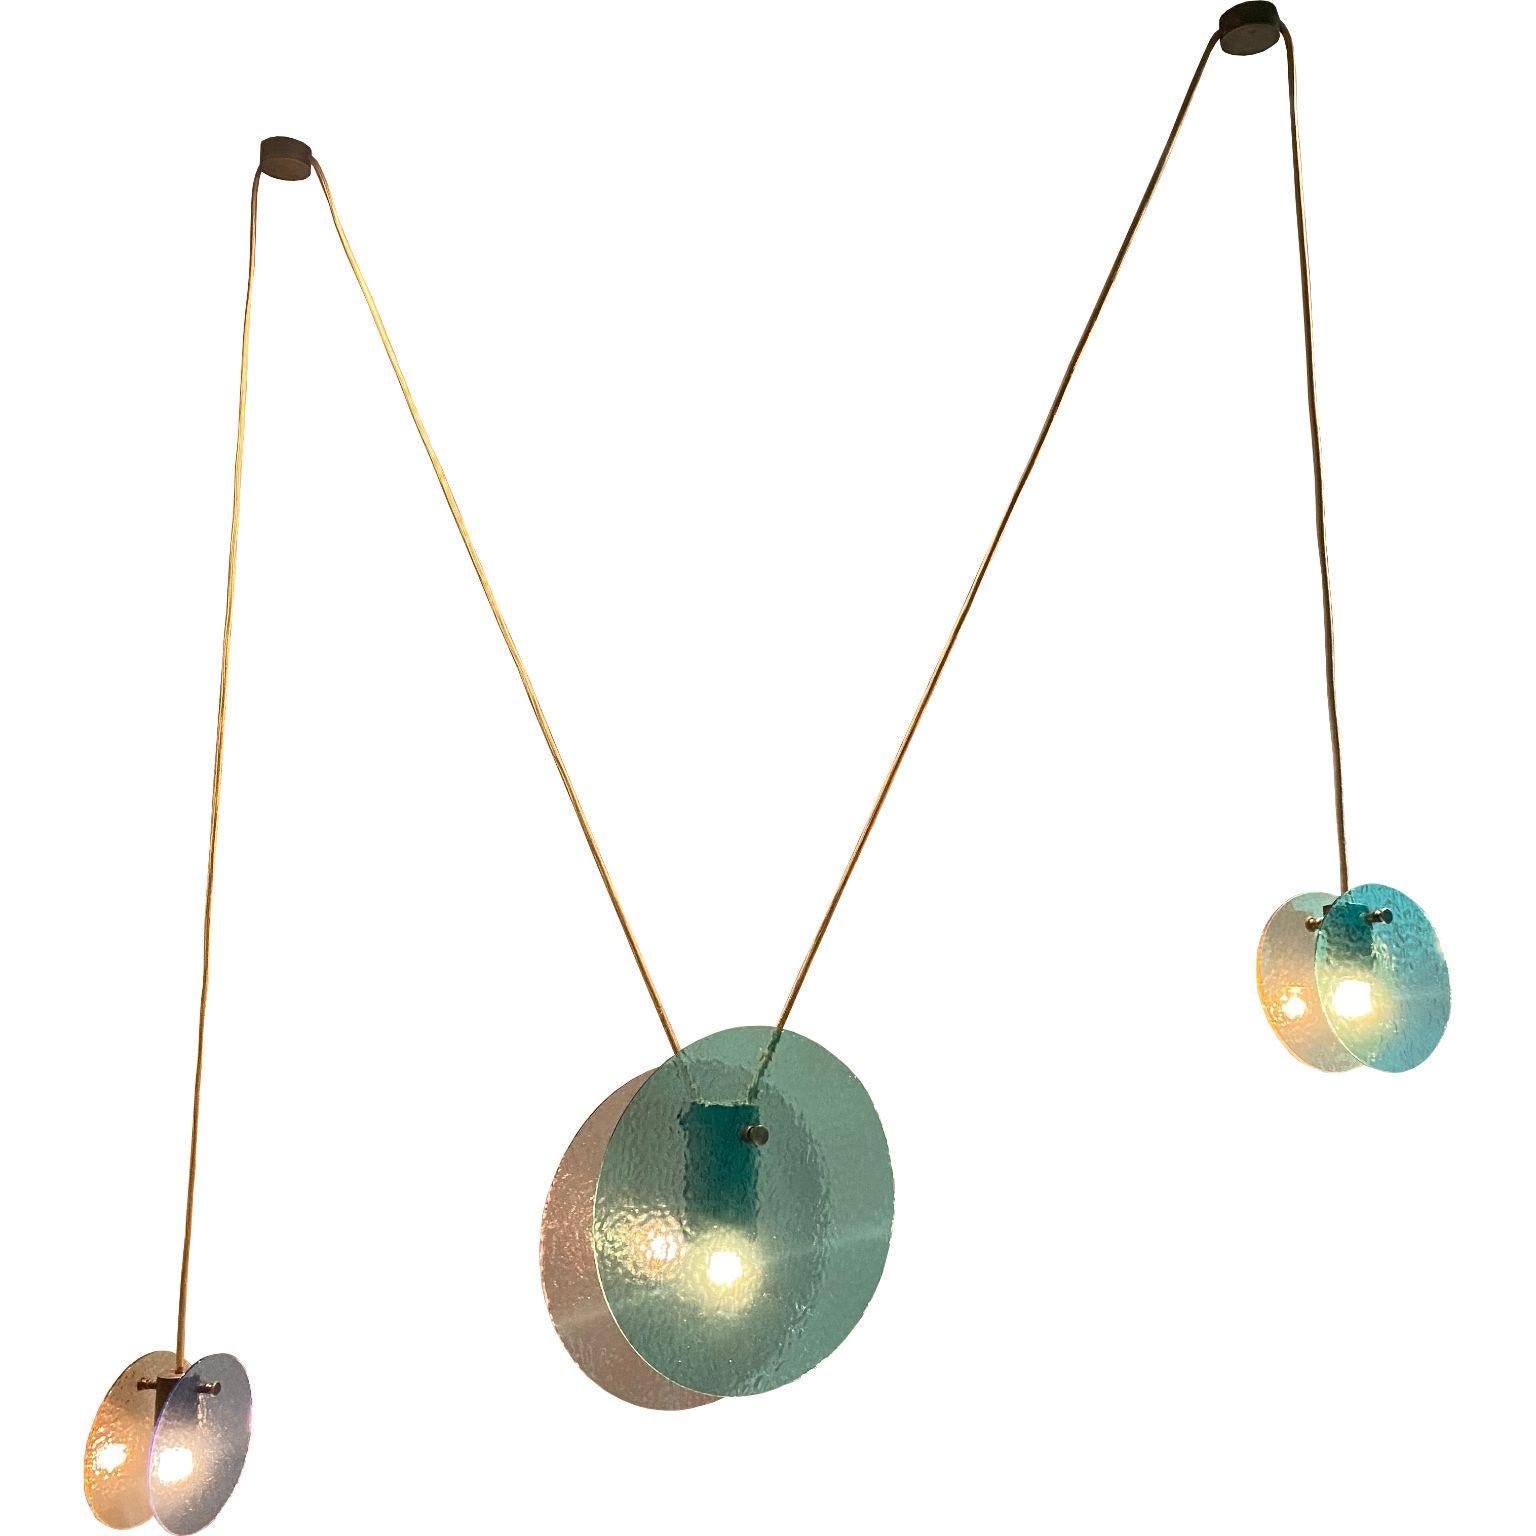 Kalupso small ceiling light by Moure Studio
Dimensions: D 150 x H 80 cm
Materials: glass and patinated brass
Also available in different dimensions. 

Our Kalupso chandelier is inspired by the Greek nymph of the sea. This name also evokes the